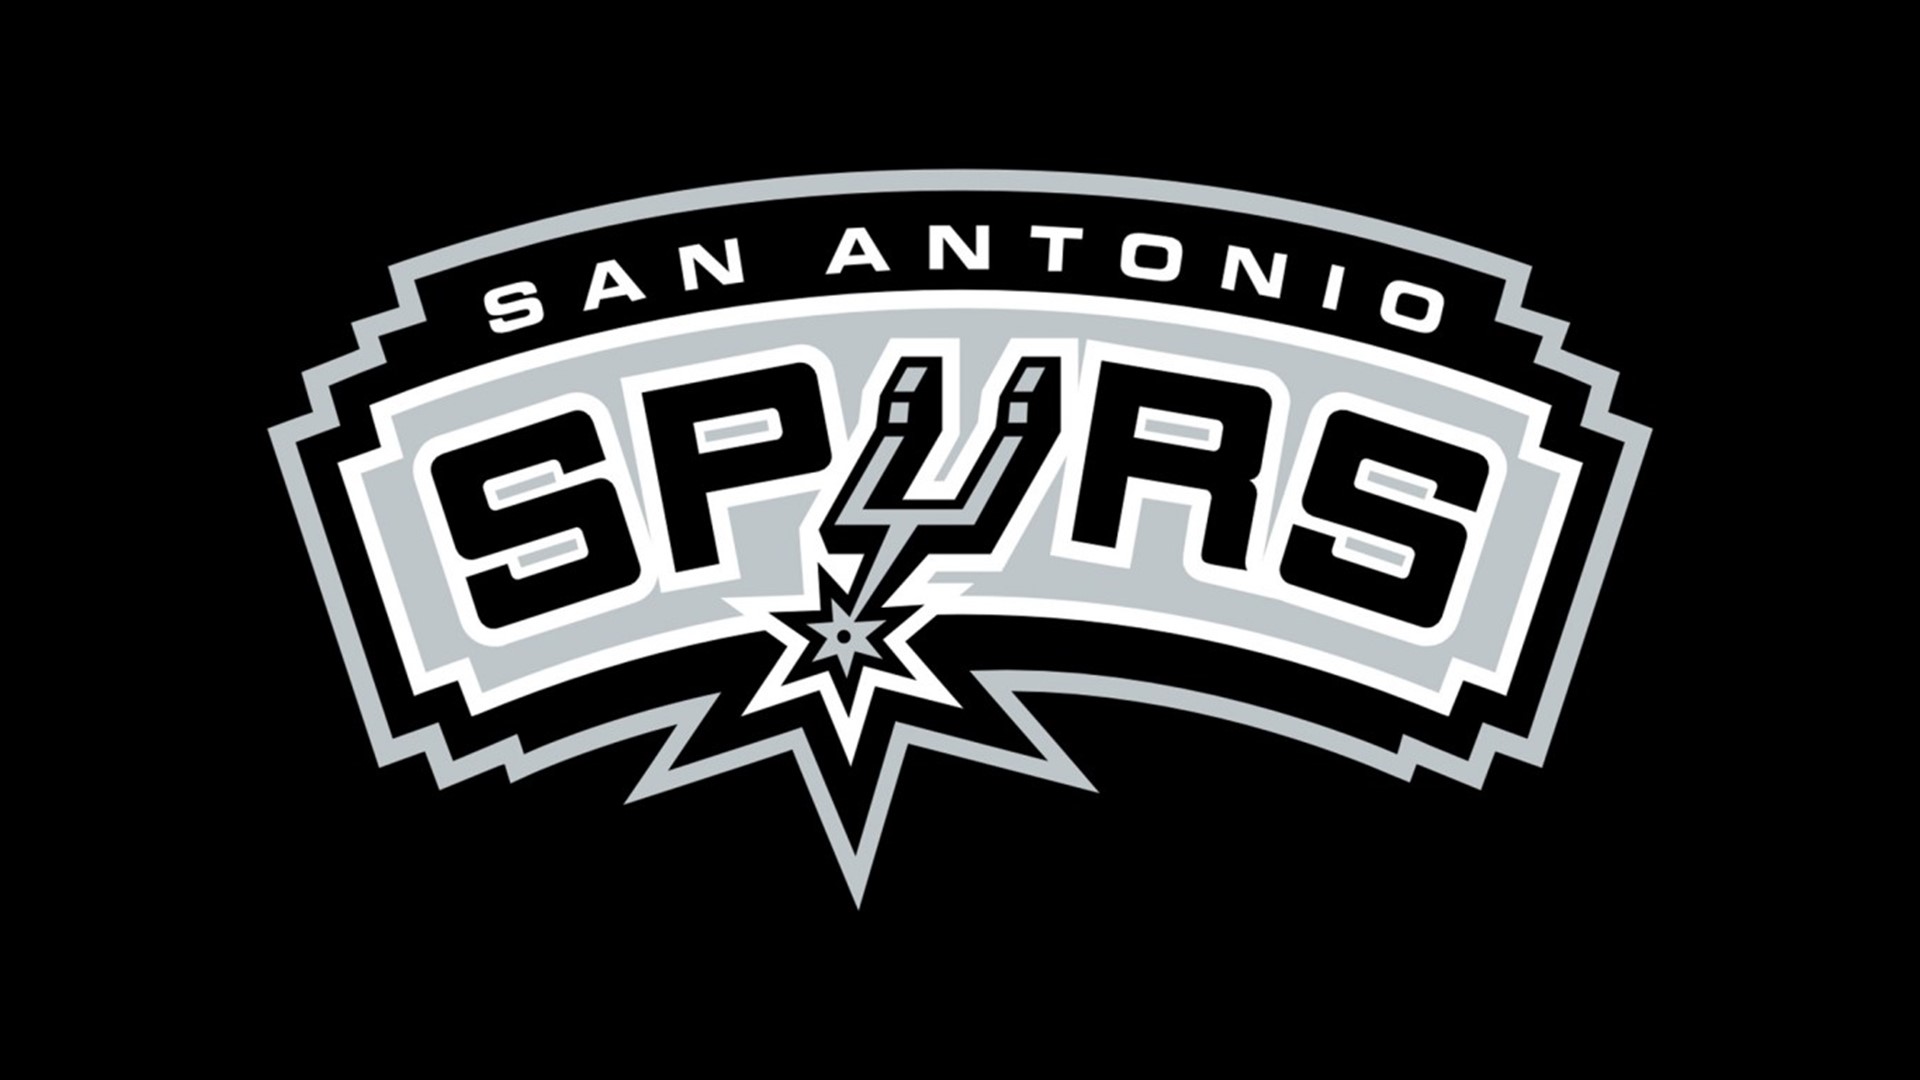 All 82 regular-season Spurs games will be available to view locally, including 10 games on KENS 5, the official TV station of the Spurs.